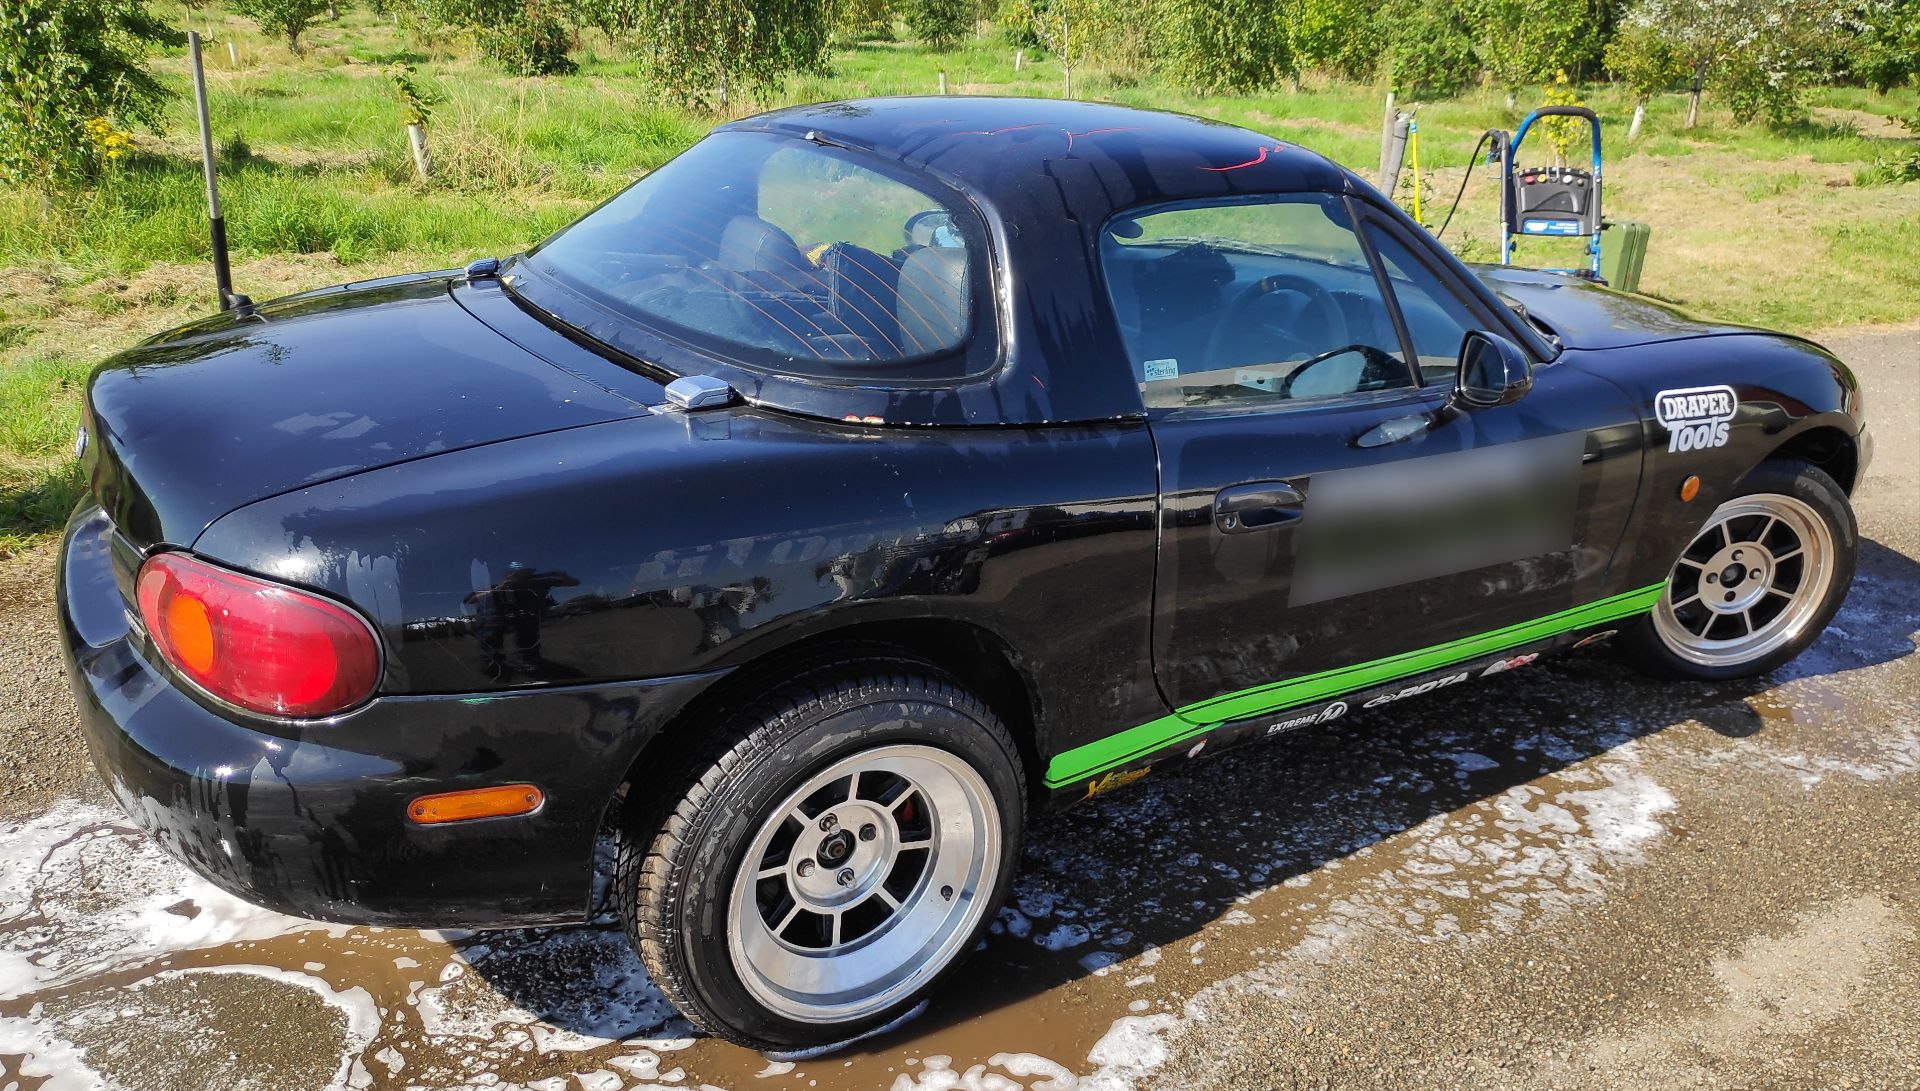 1 x 2000 Mazda MX5 Mk2 Drift Car - Includes 3 Extra Wheels/Tyres - Ref: T4 - CL682 - Location: Bedfo - Image 3 of 77